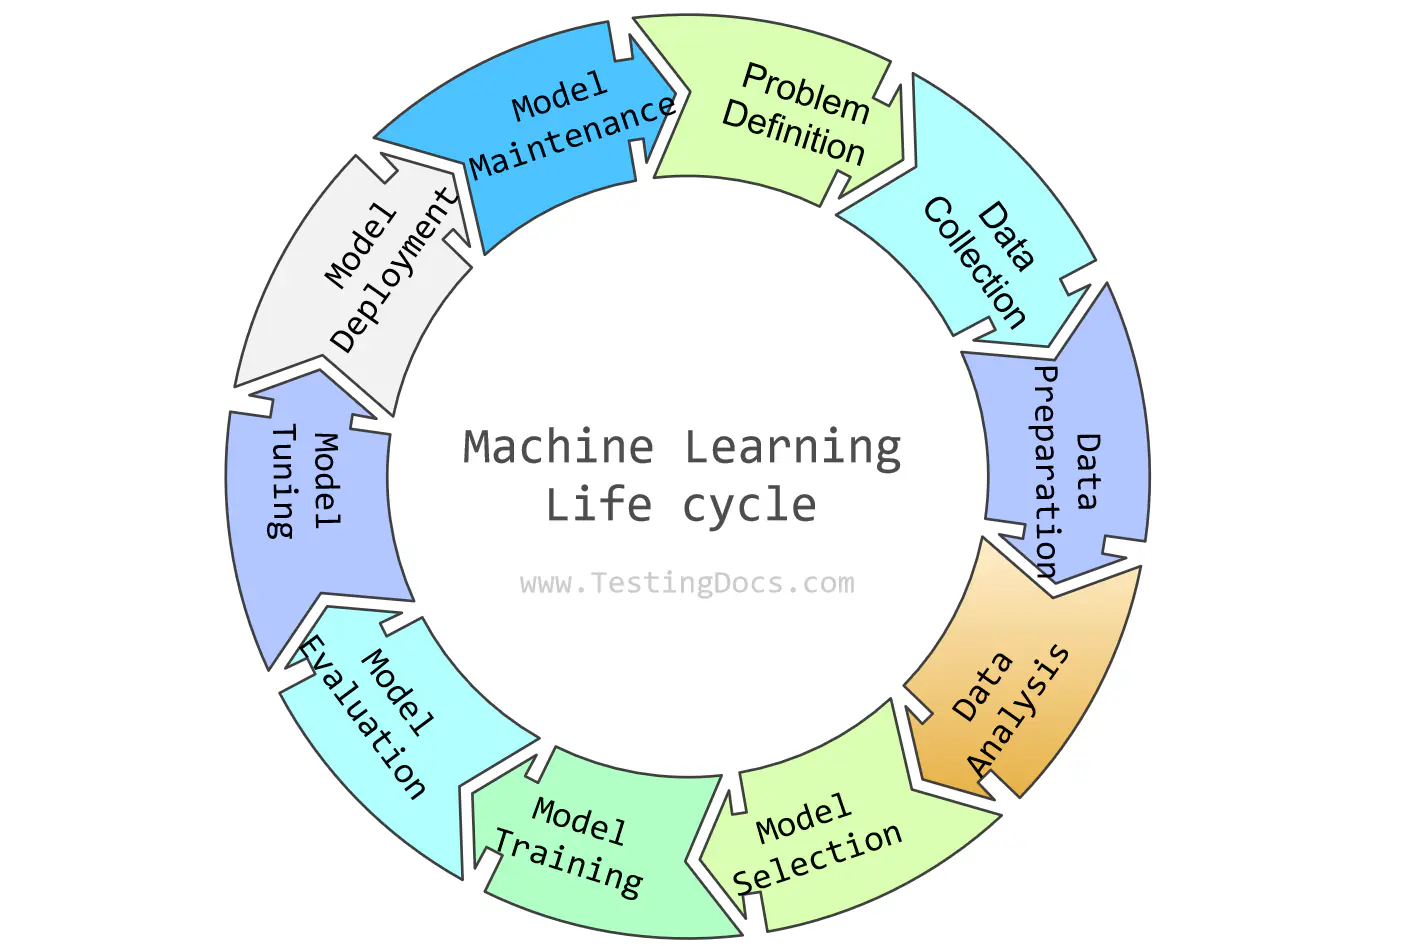 Machine Learning Life cycle